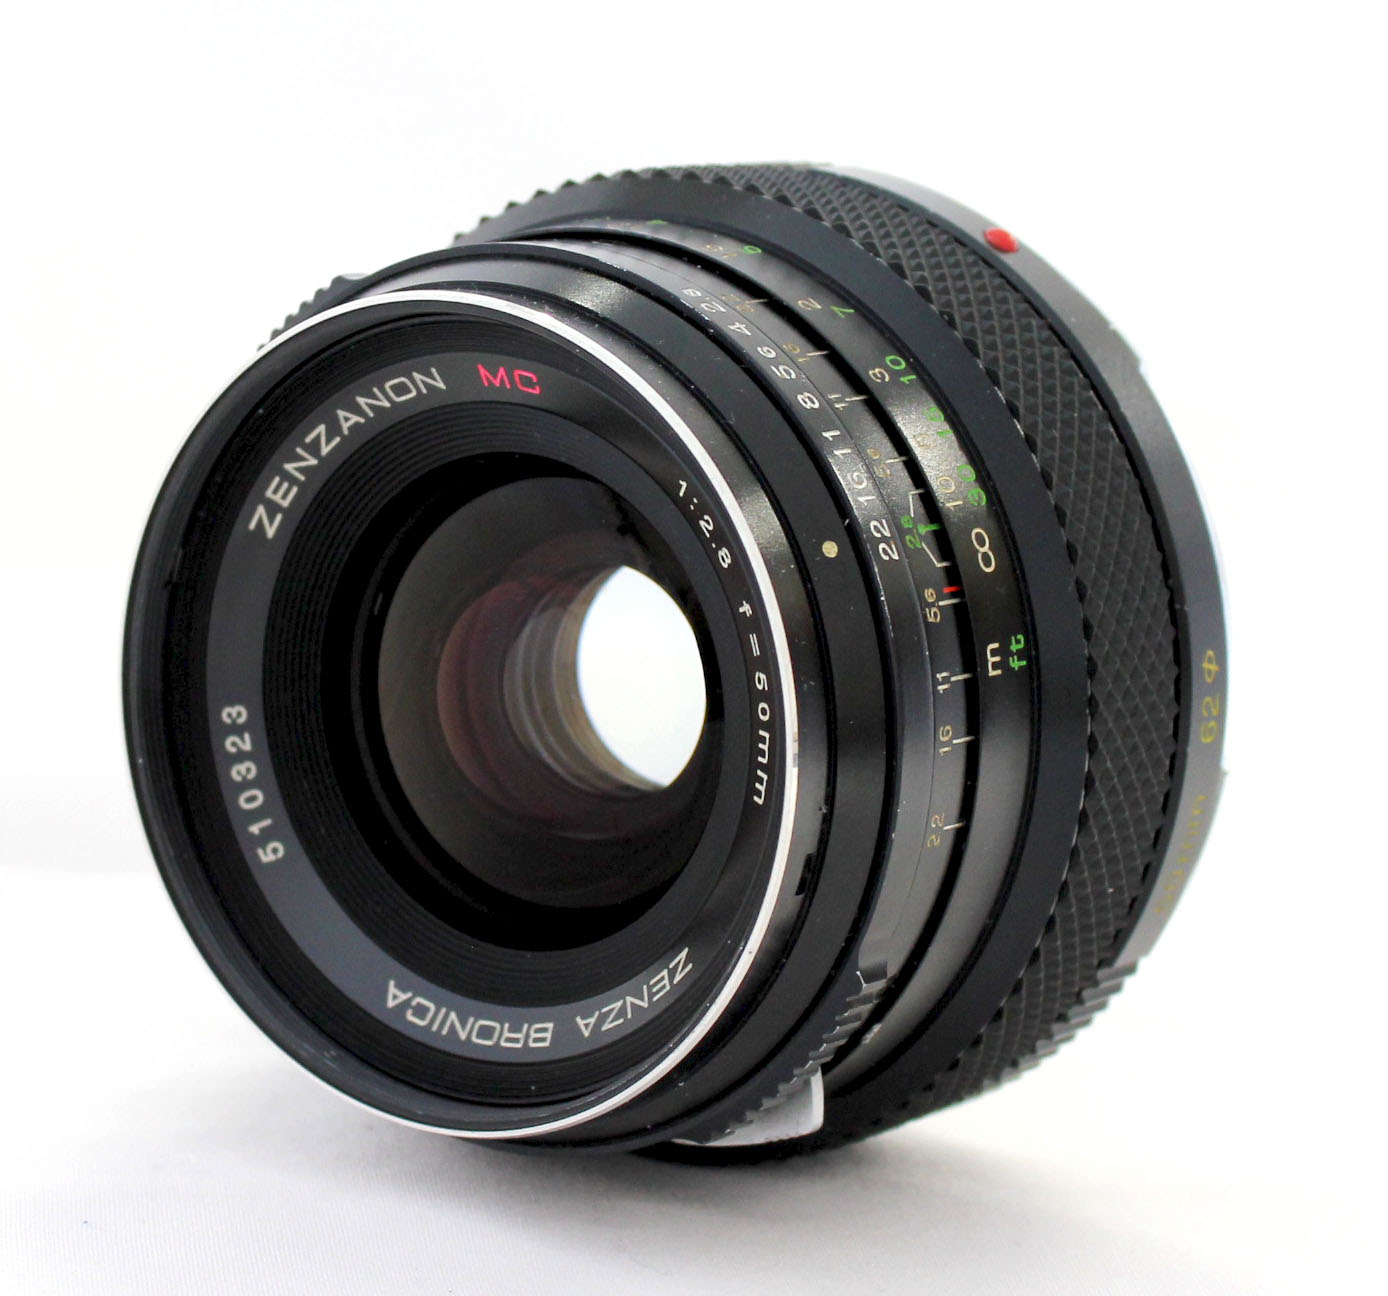 Japan Used Camera Shop | Zenza Bronica Zenzanon MC 50mm F/2.8 Lens for ETR S Si from Japan